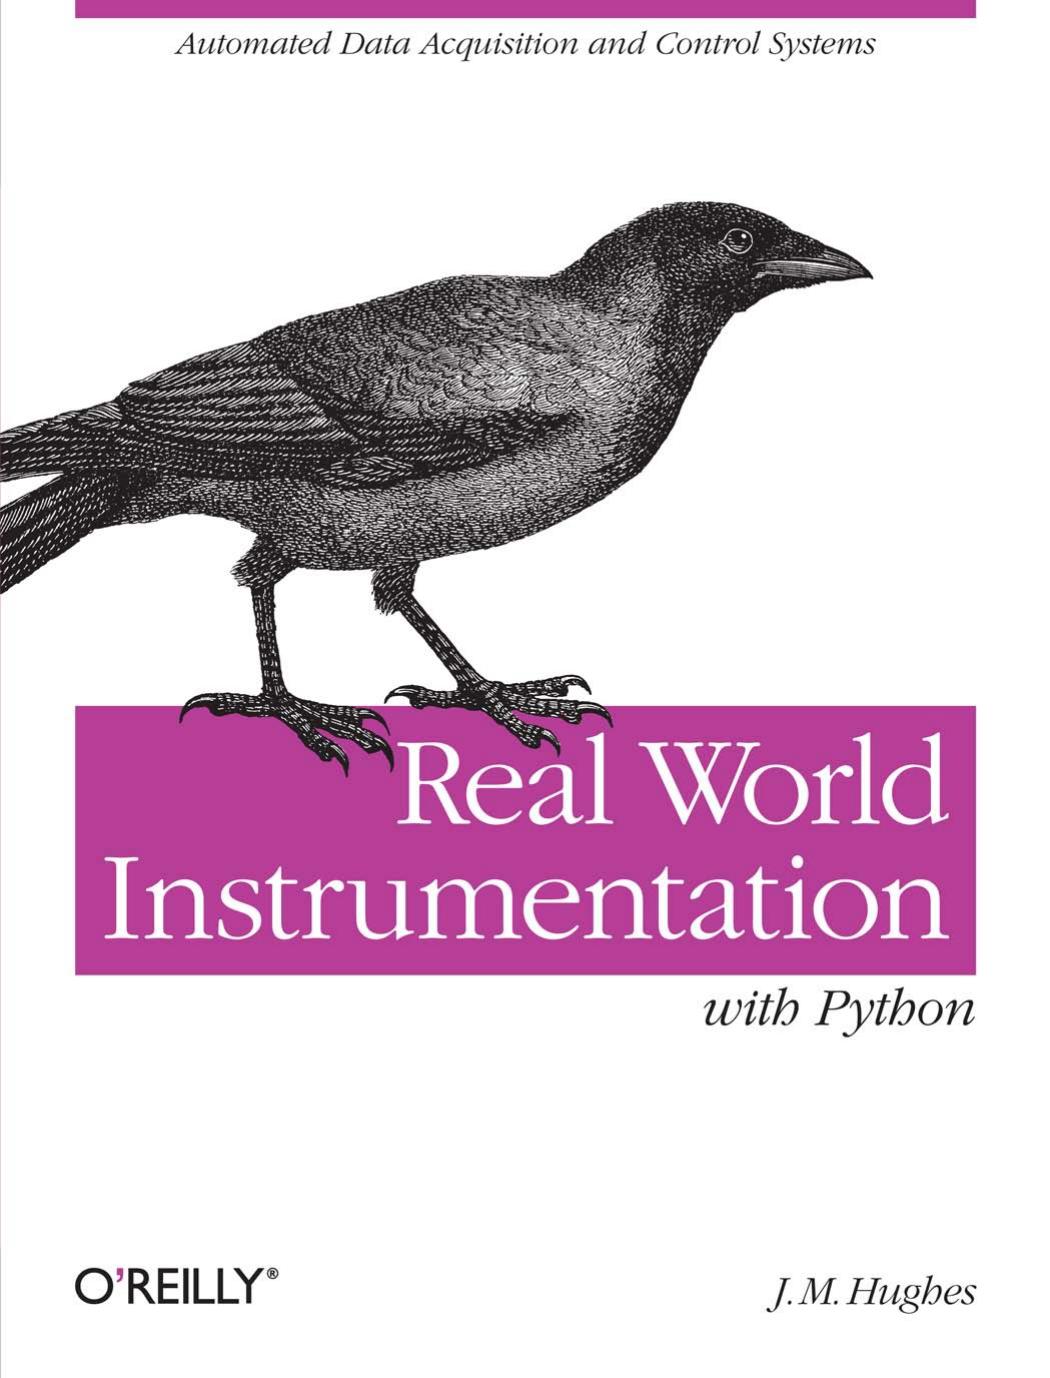 Real World Instrumentation with Python by J. M. Hughes